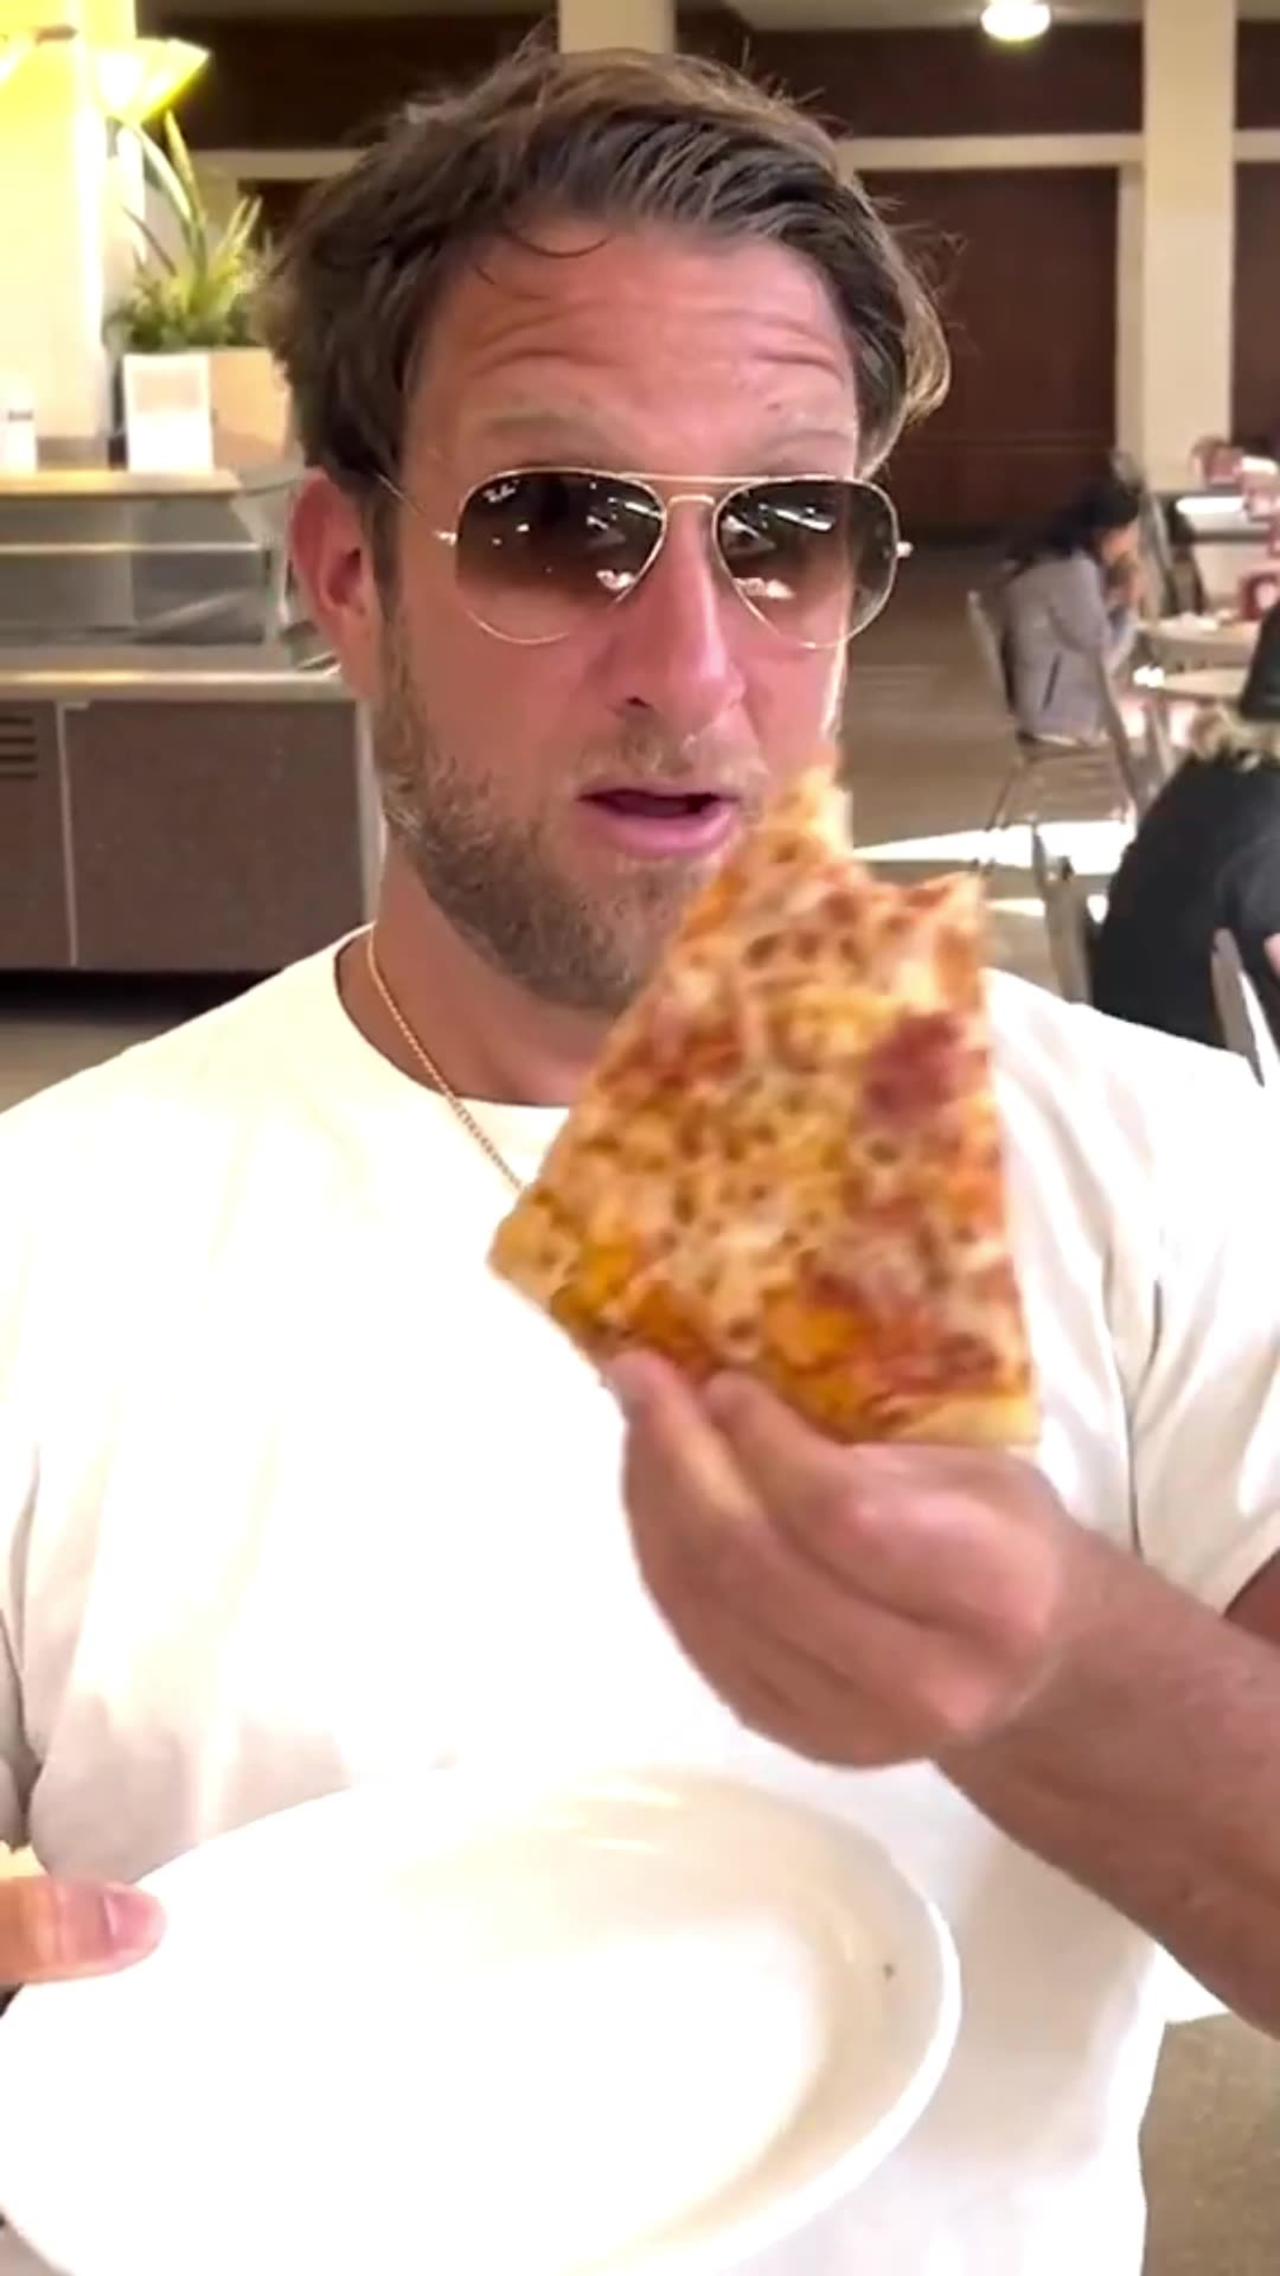 Dave Portnoy Tries College Dining Room Pizza At Rutgers